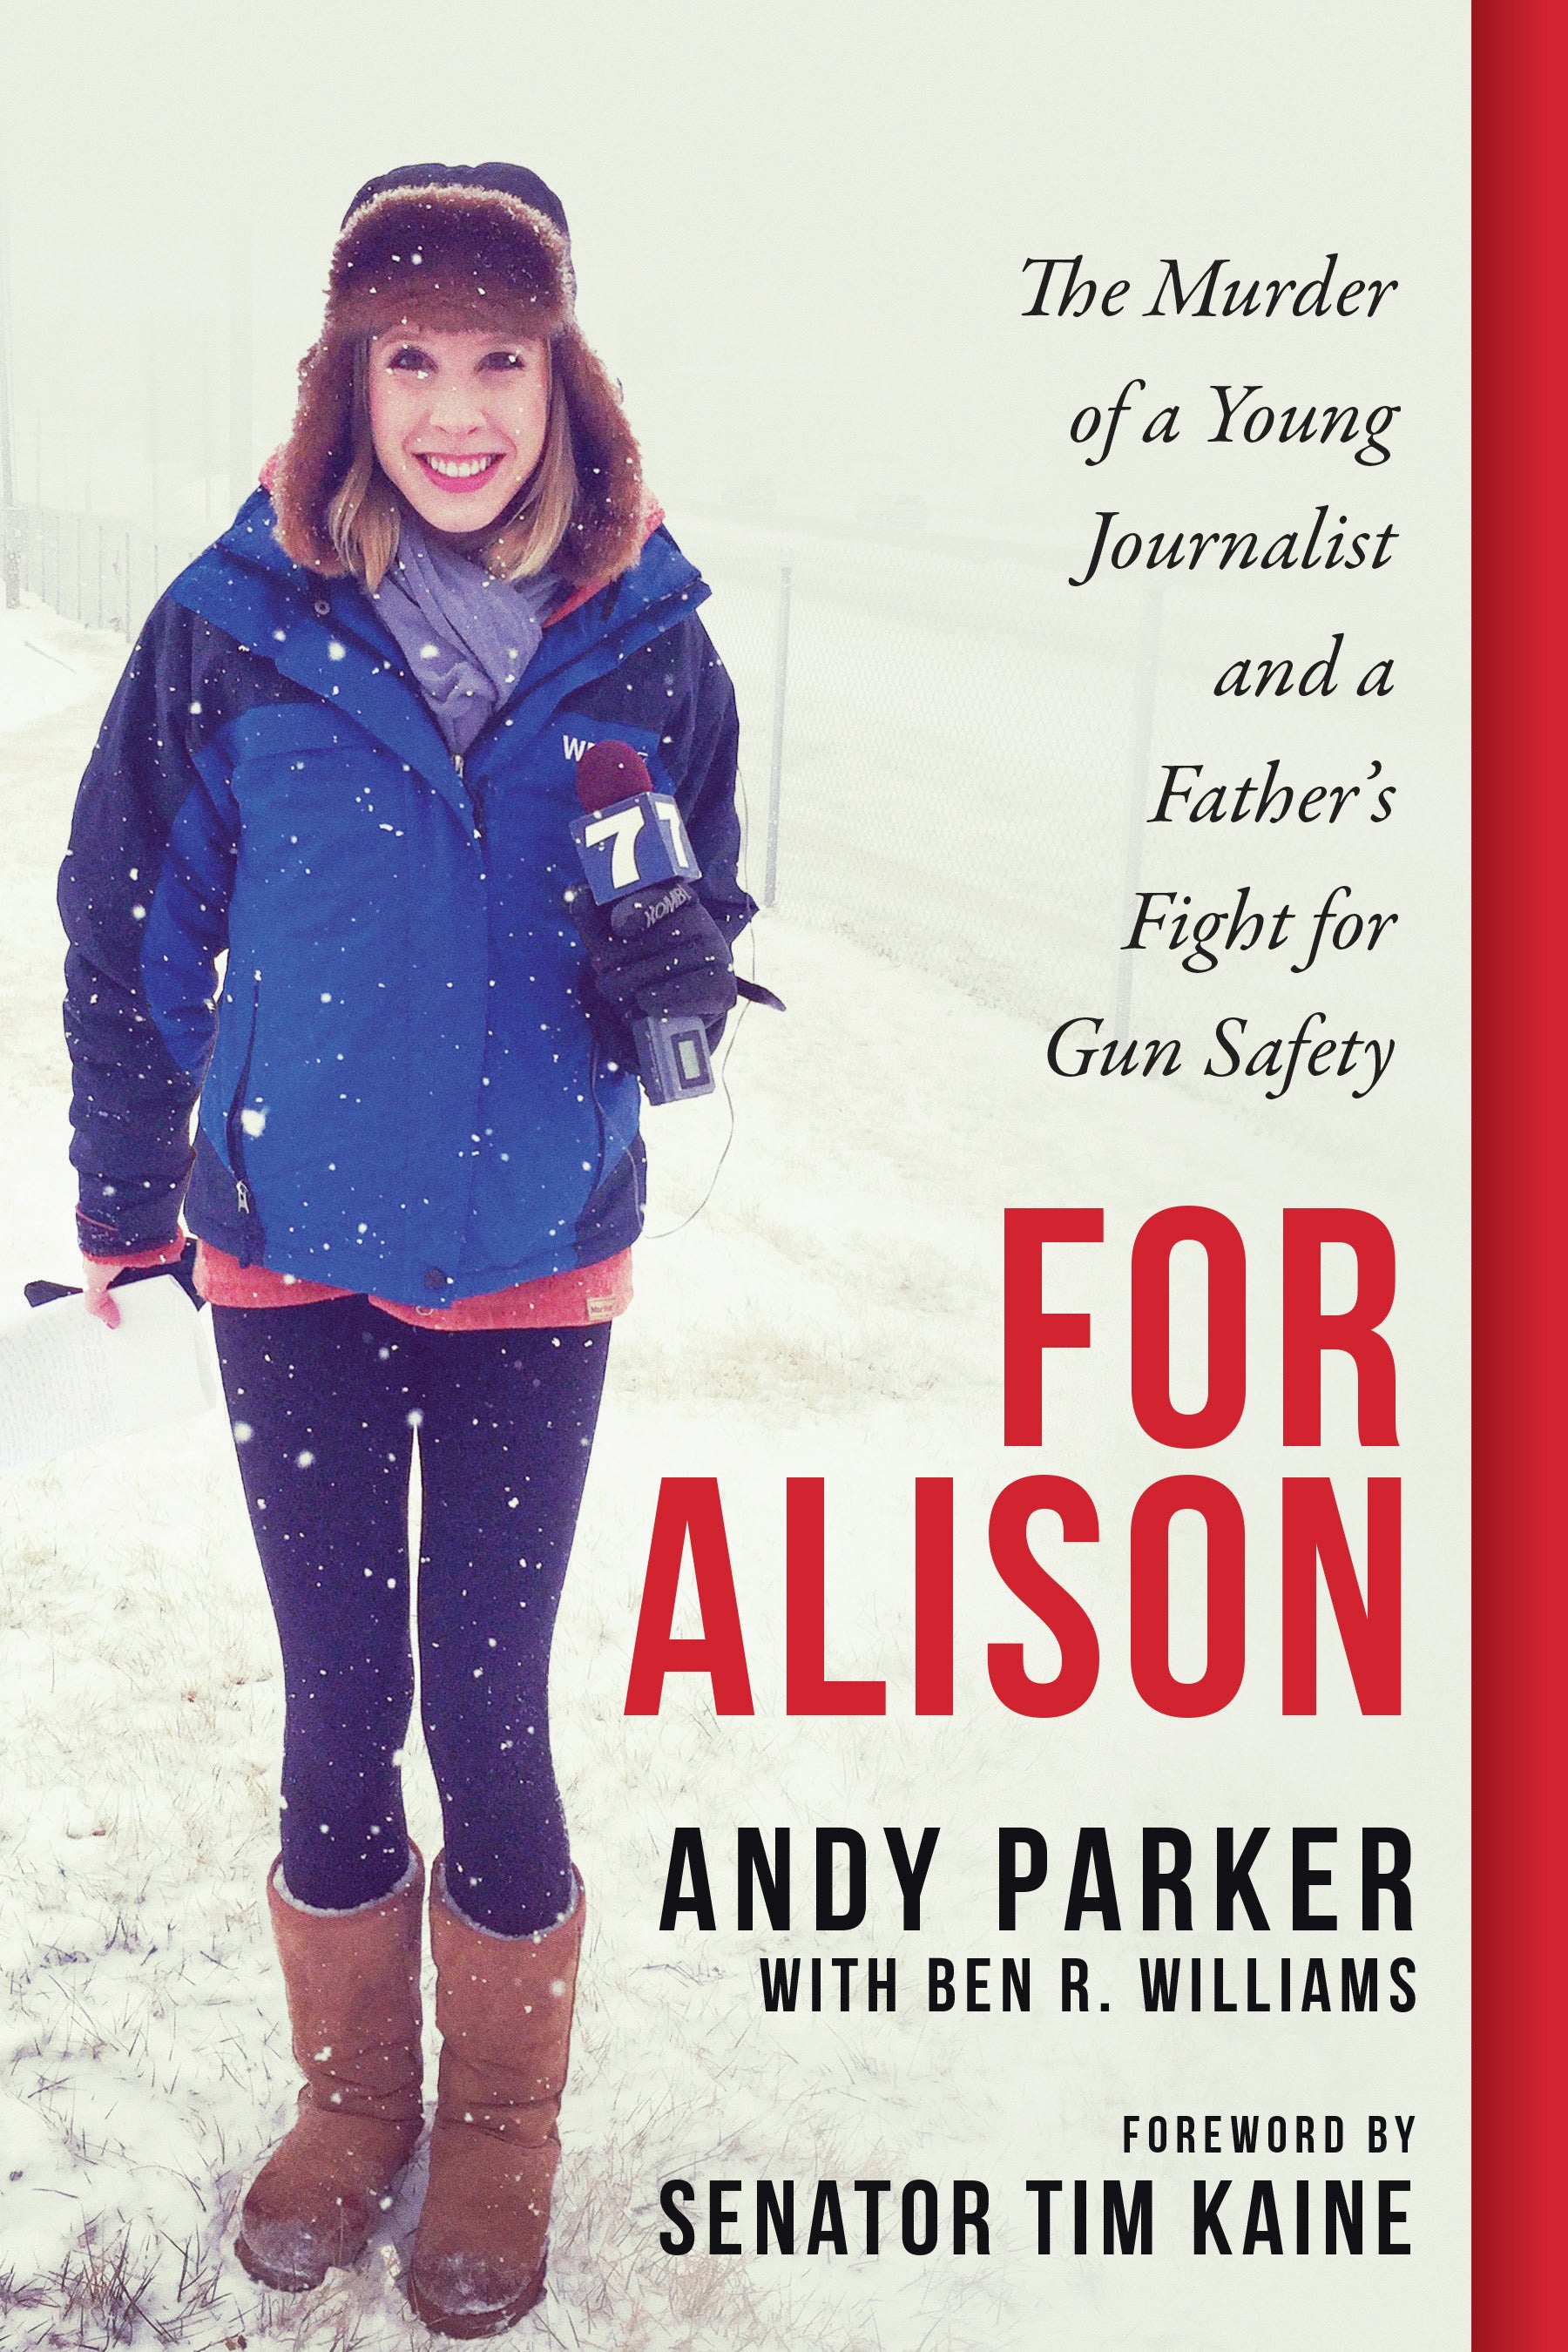 Reporter Alison Parker’s father has become an advocate for social media protections and gun control following his daughter’s 2015 murder